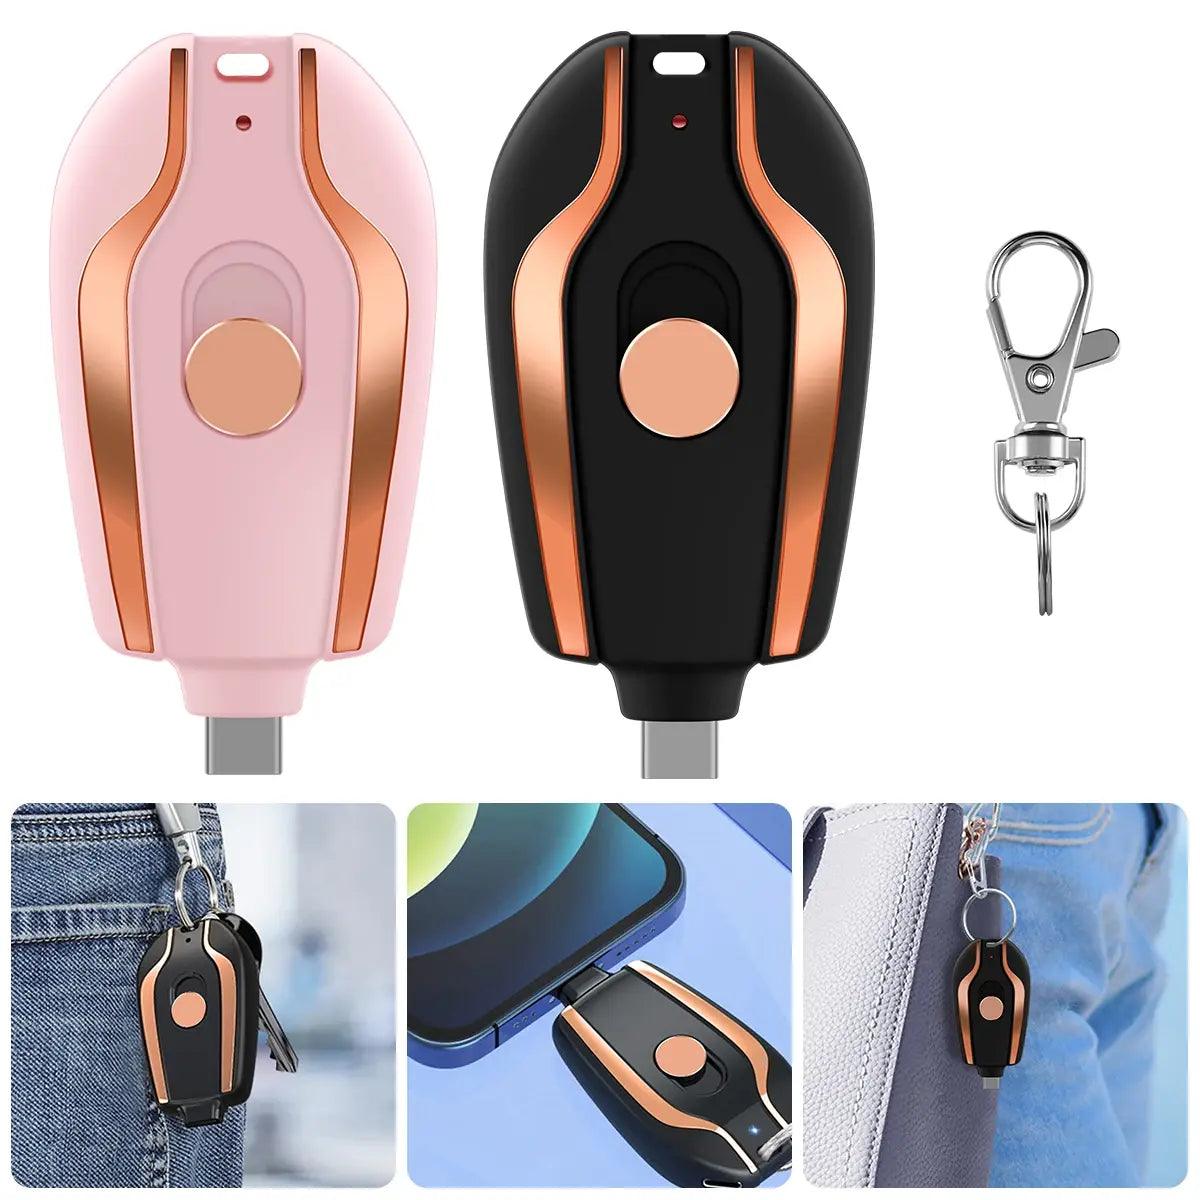 Portable Keychain Charger for Android Devices - ACO Marketplace